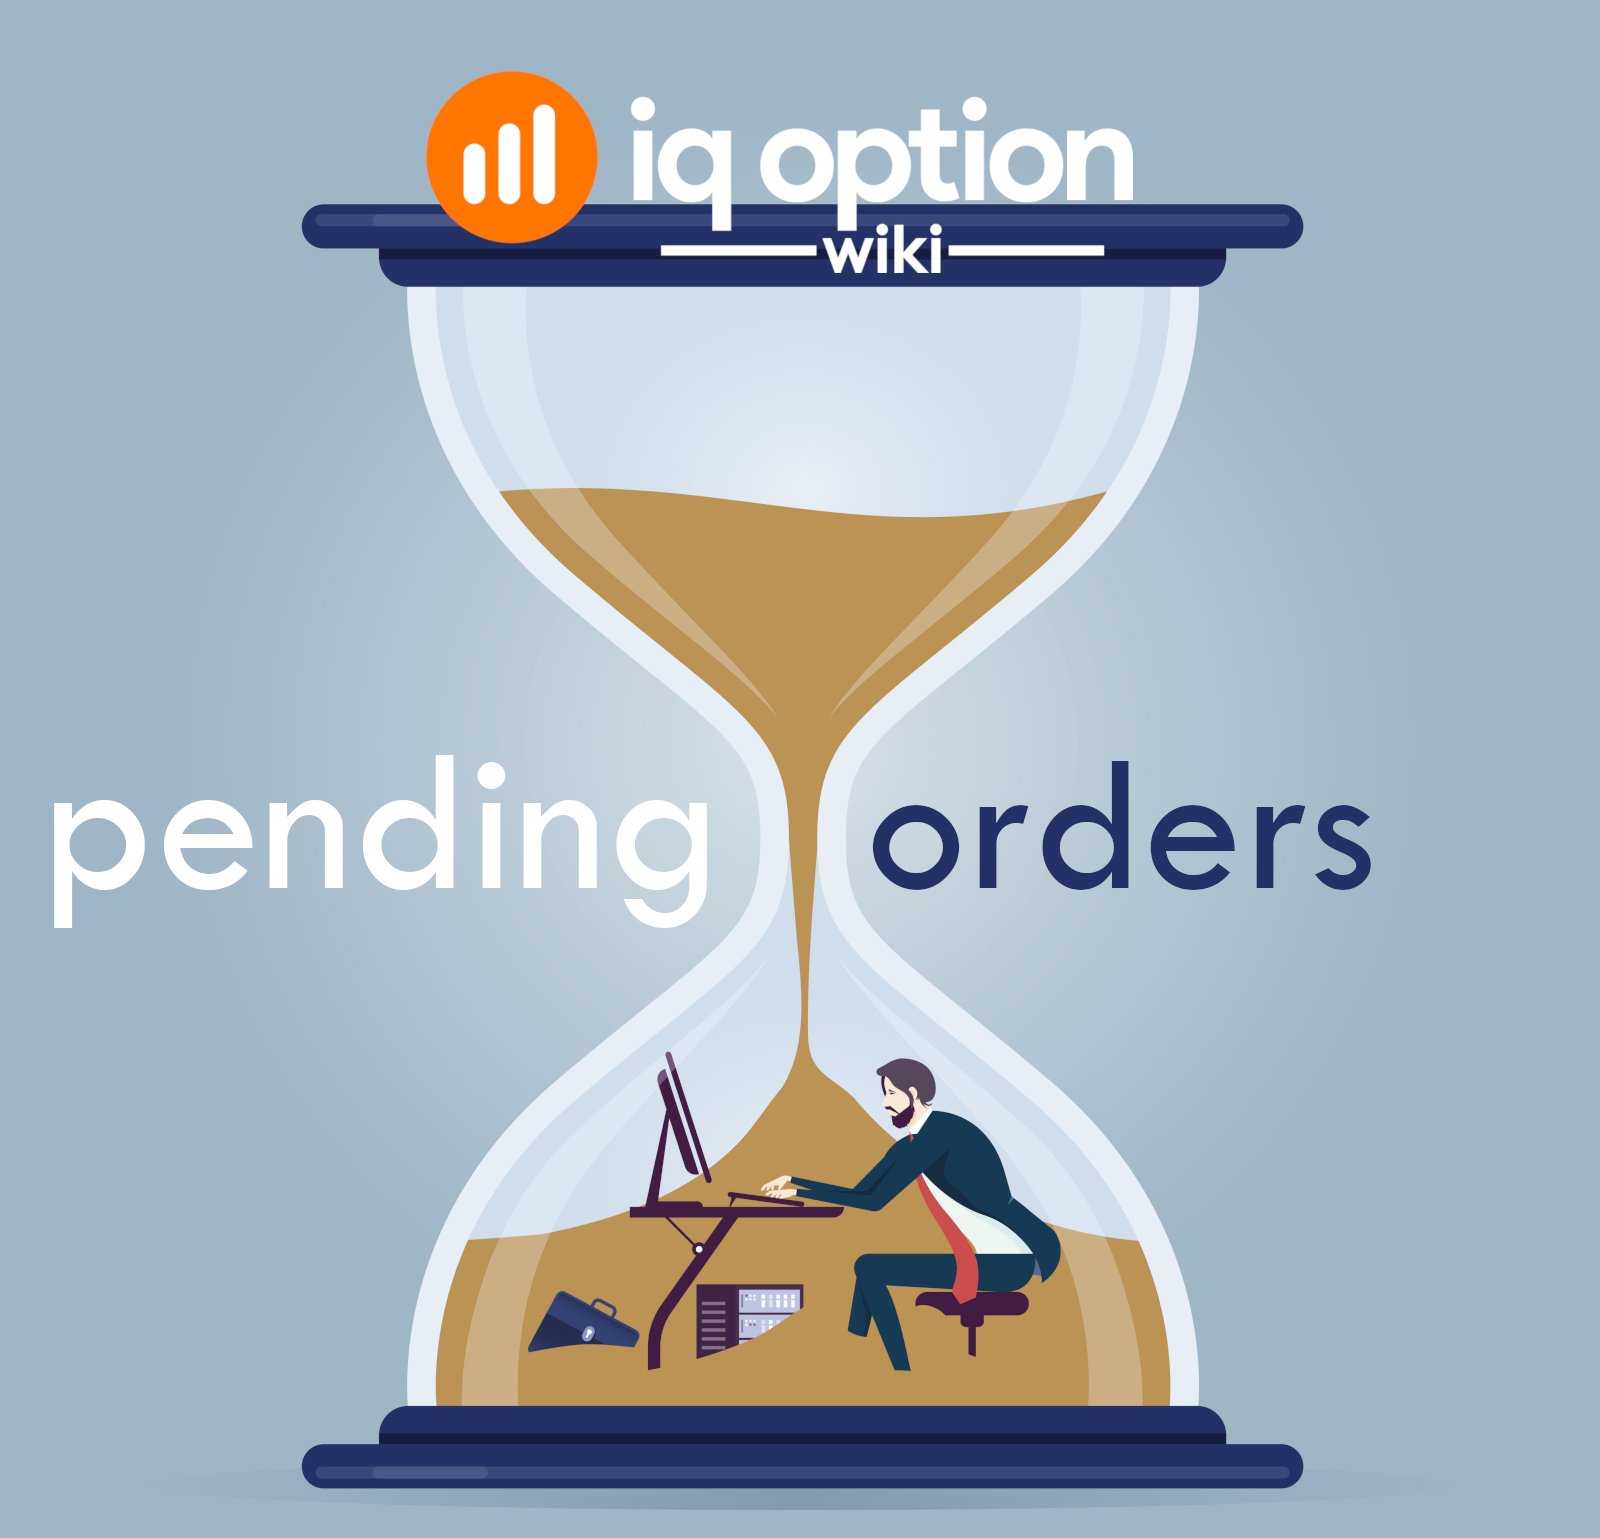 pending orders at iq option